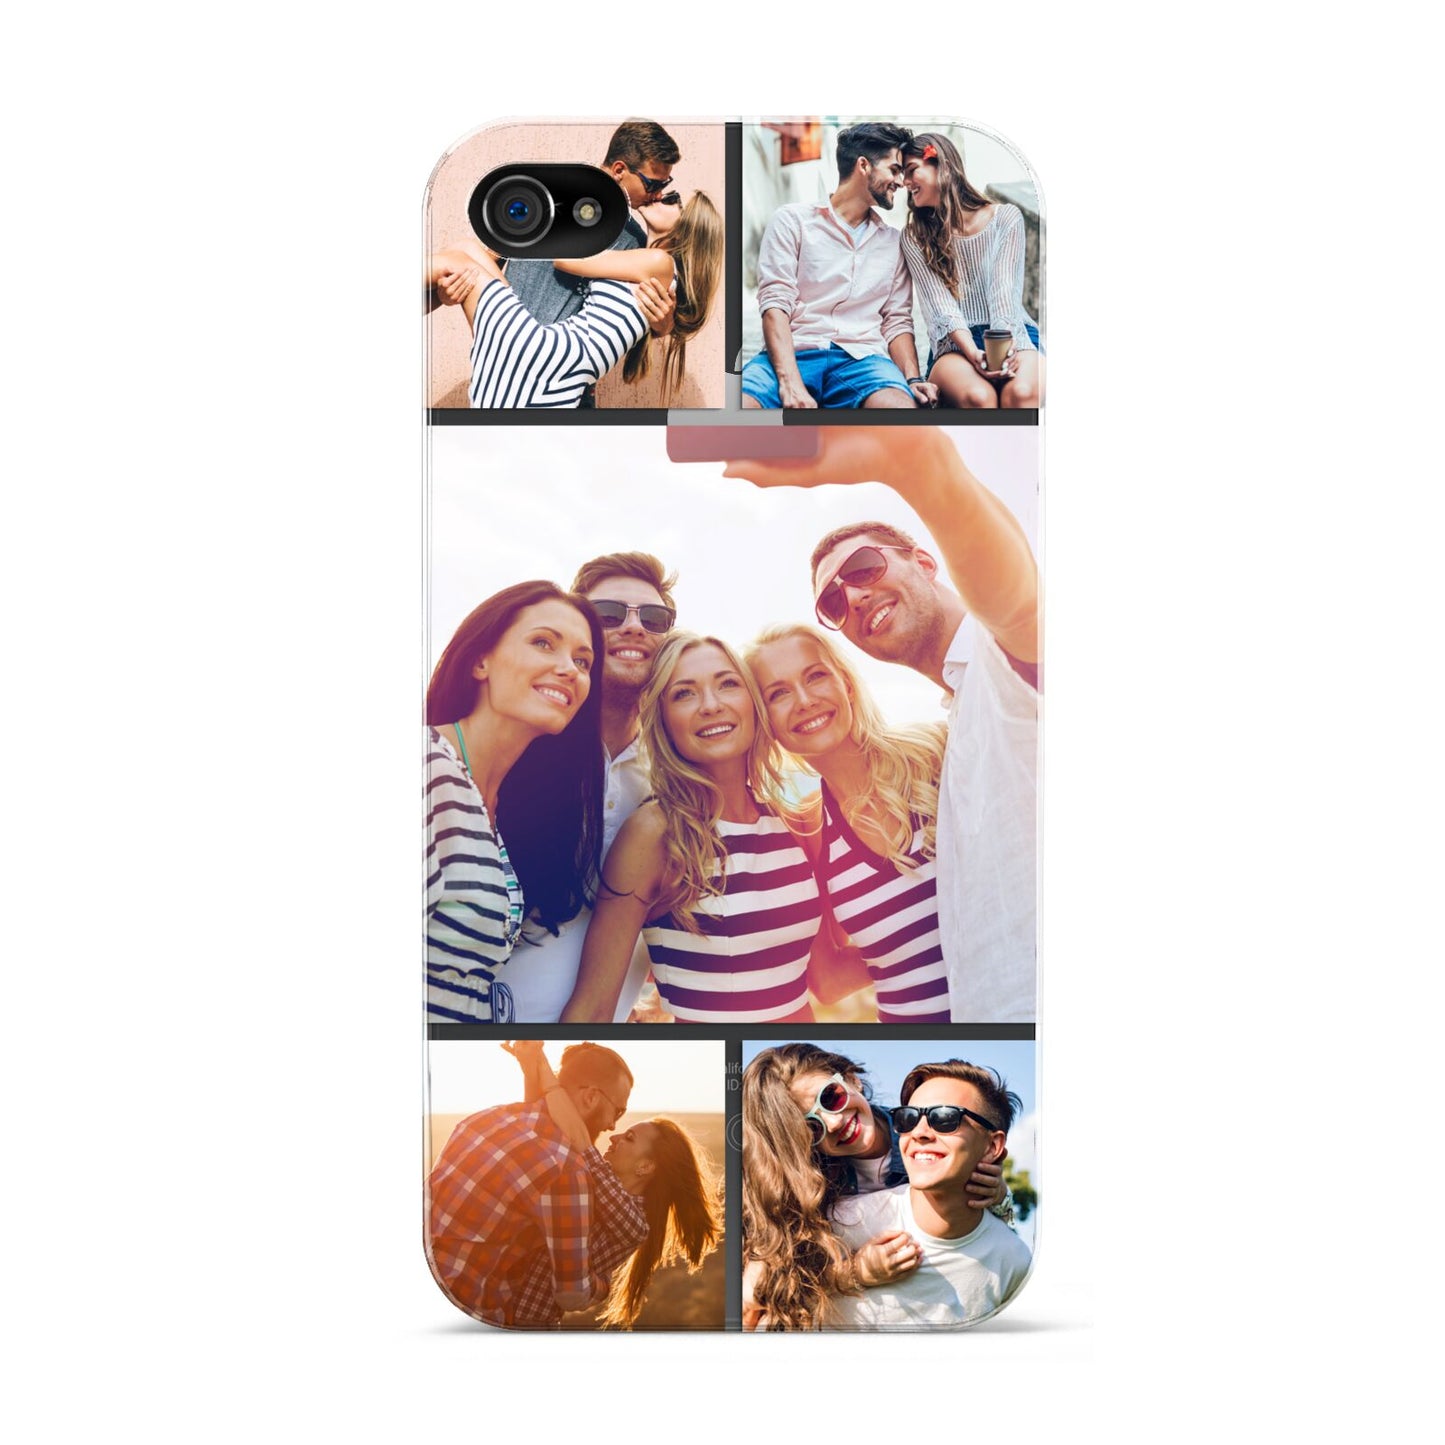 Tile Photo Collage Upload Apple iPhone 4s Case